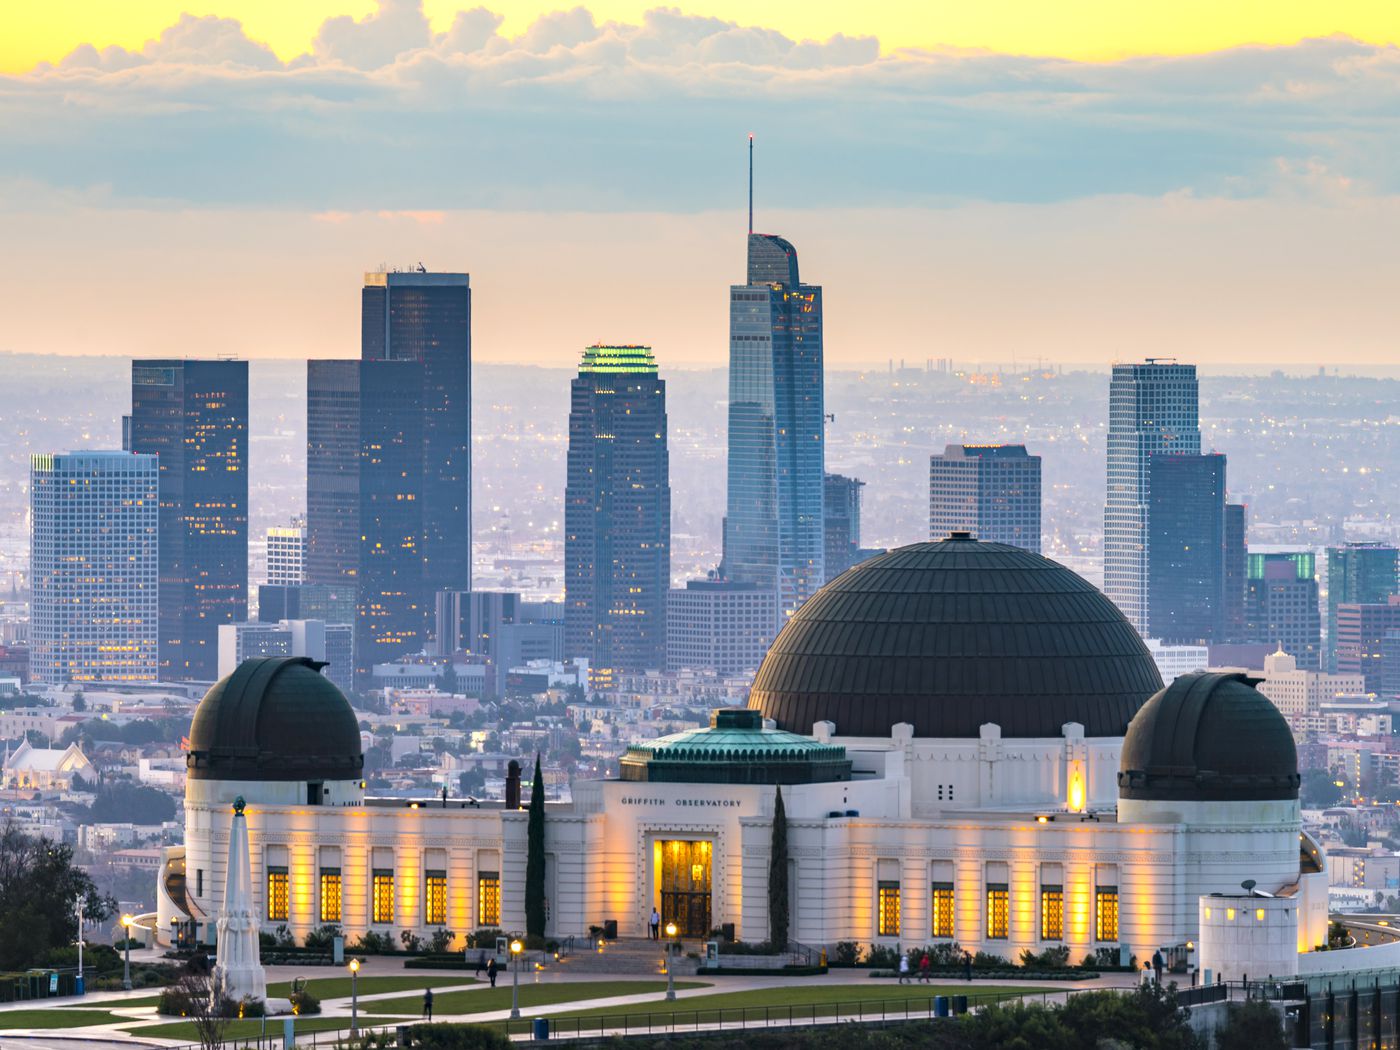 Griffith Observatory: LA's 'most recognizable and beloved' building